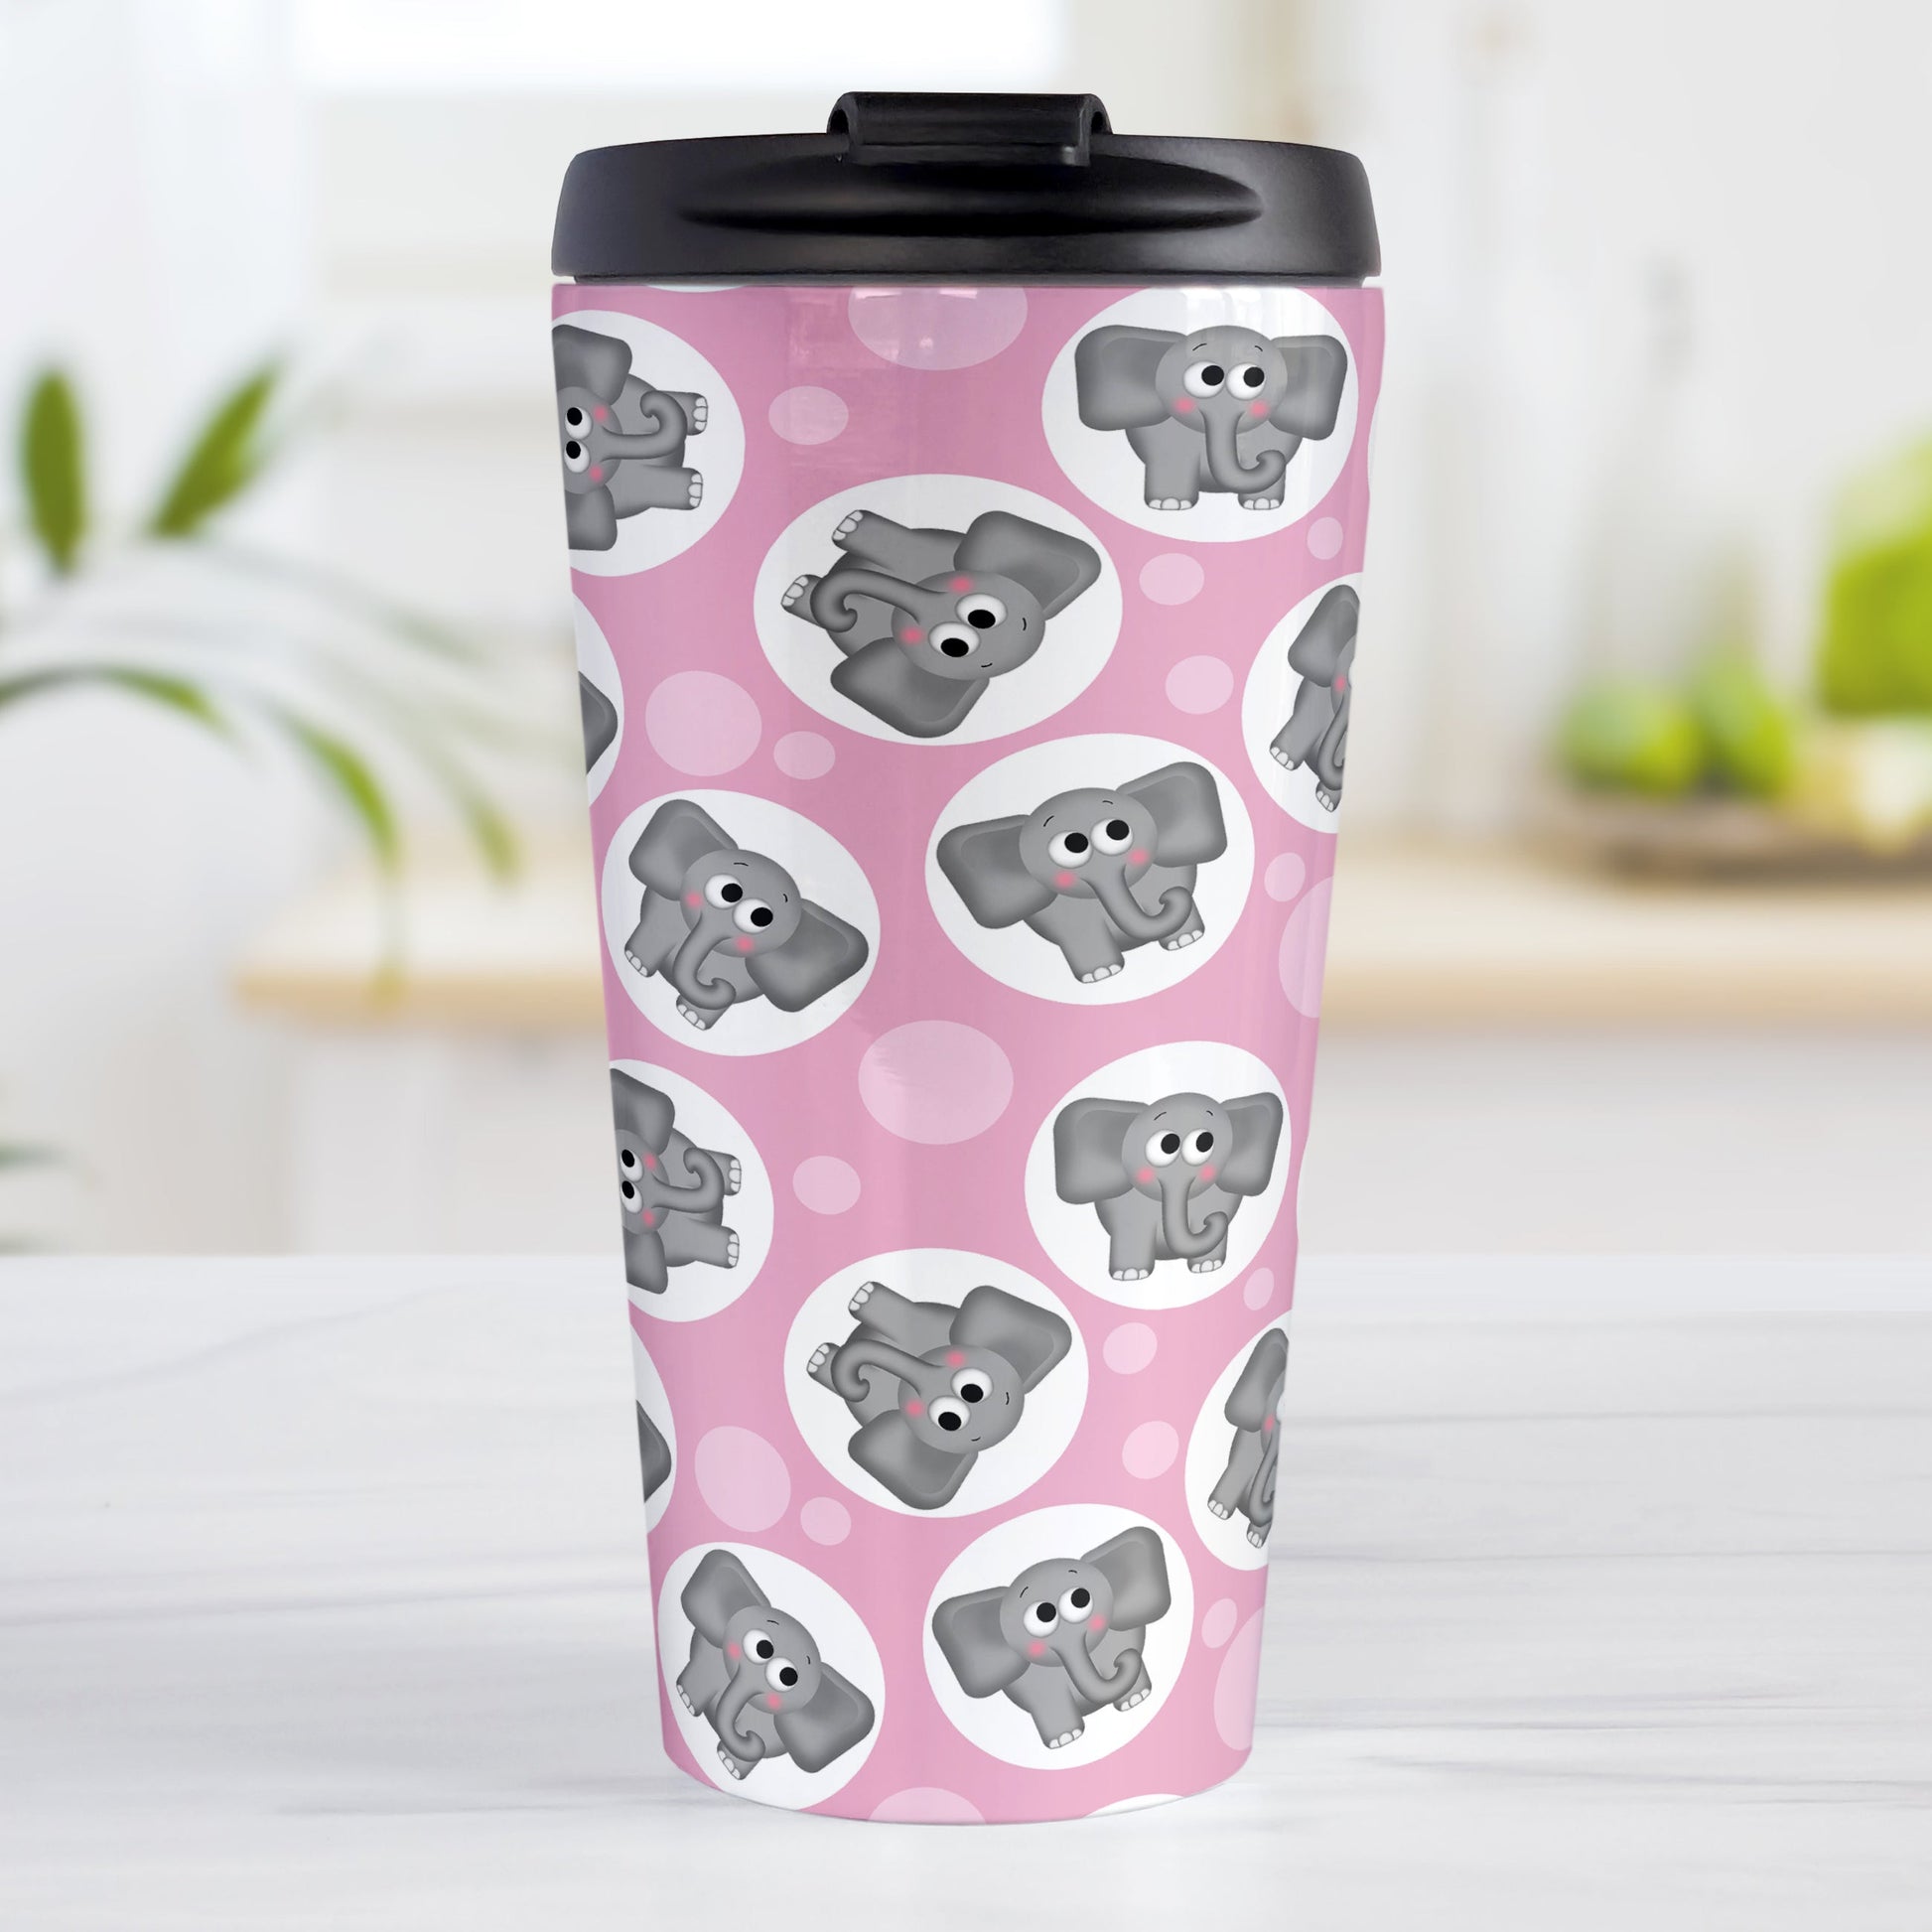 Cute Pink Elephant Pattern Travel Mug (15oz, stainless steel insulated) at Amy's Coffee Mugs